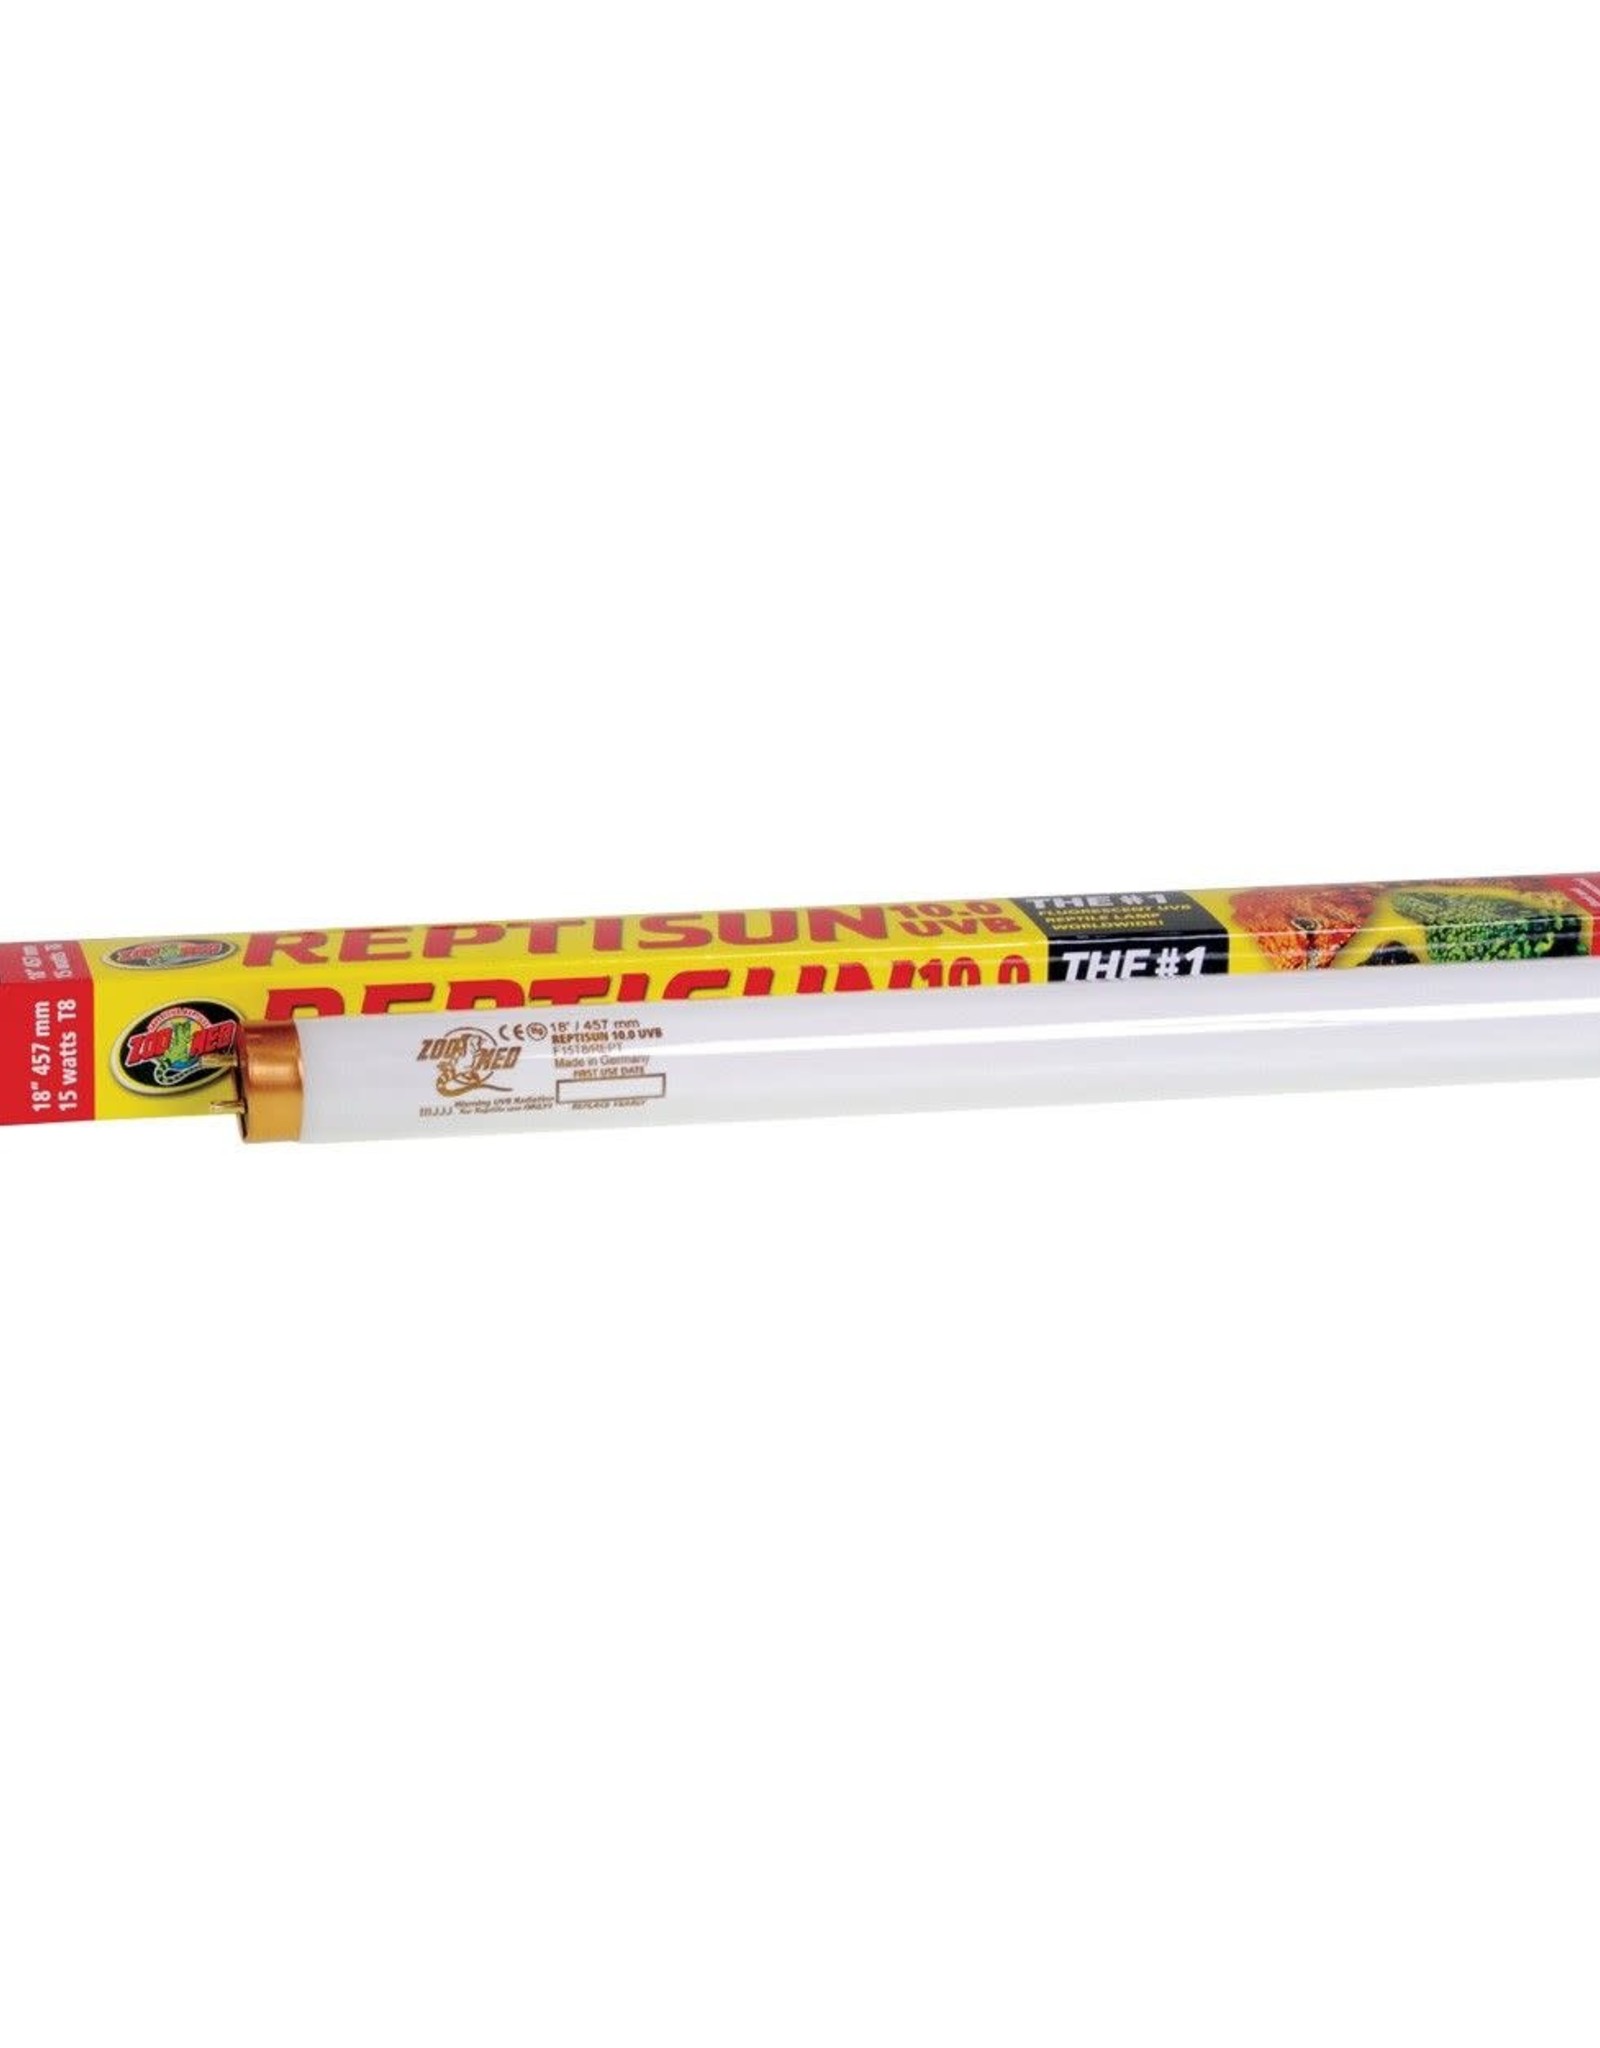 ZOO MED LABORATORIES, INC. ZOO MED- OS-48- REPTISUN- 10.0 UVB- FLUORESCENT BULB- T8- 1.25X1.25X- 48 INCH